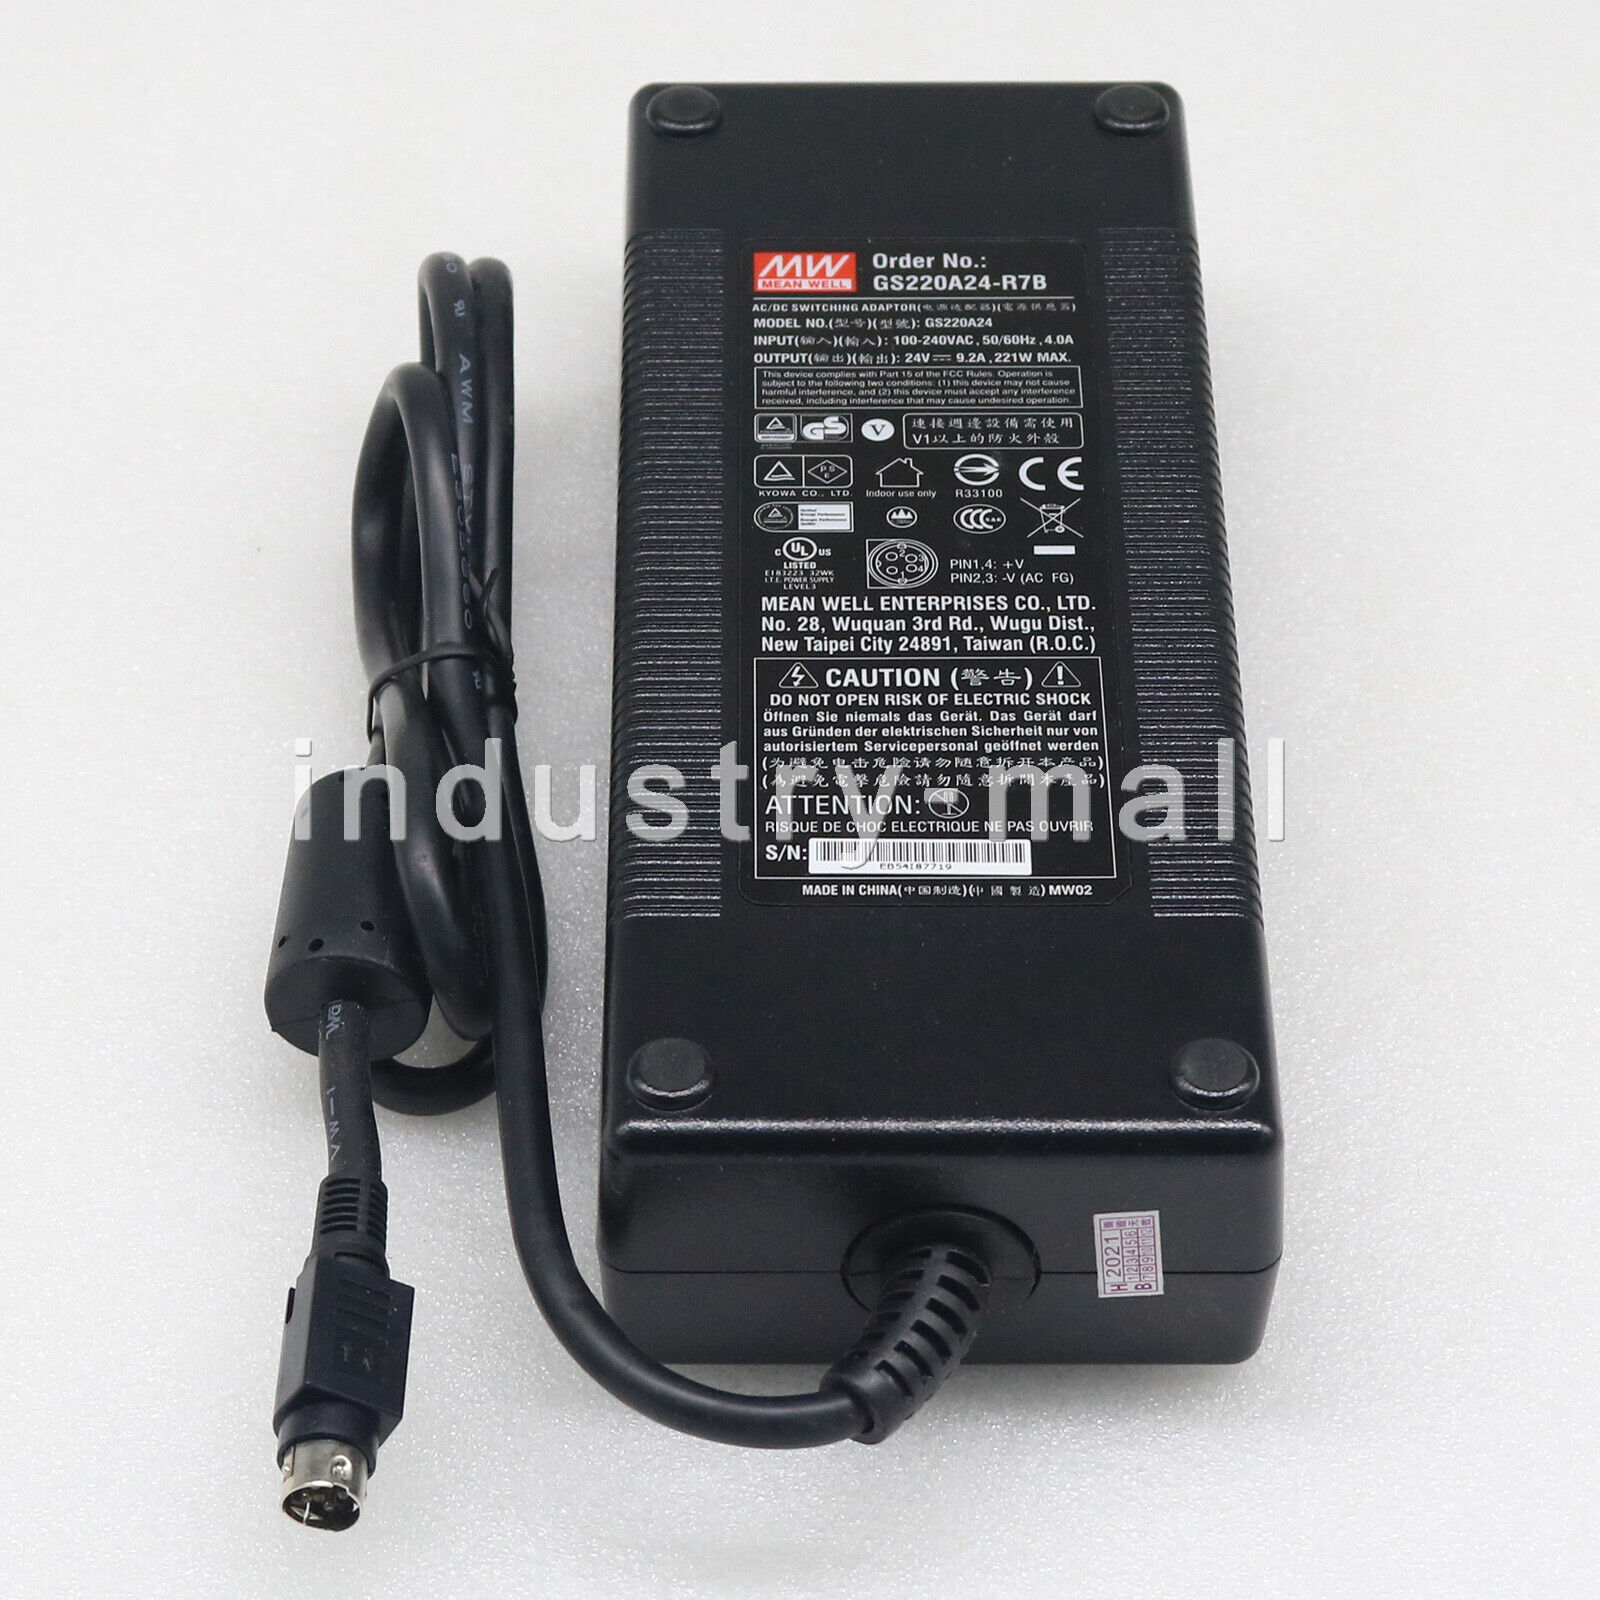 For MEAN WELL GS220A24-R7B 24V 9.2A New power supply Model: GS220A24-R7B UPC: Does not apply MPN: GS220A24-R7B Br